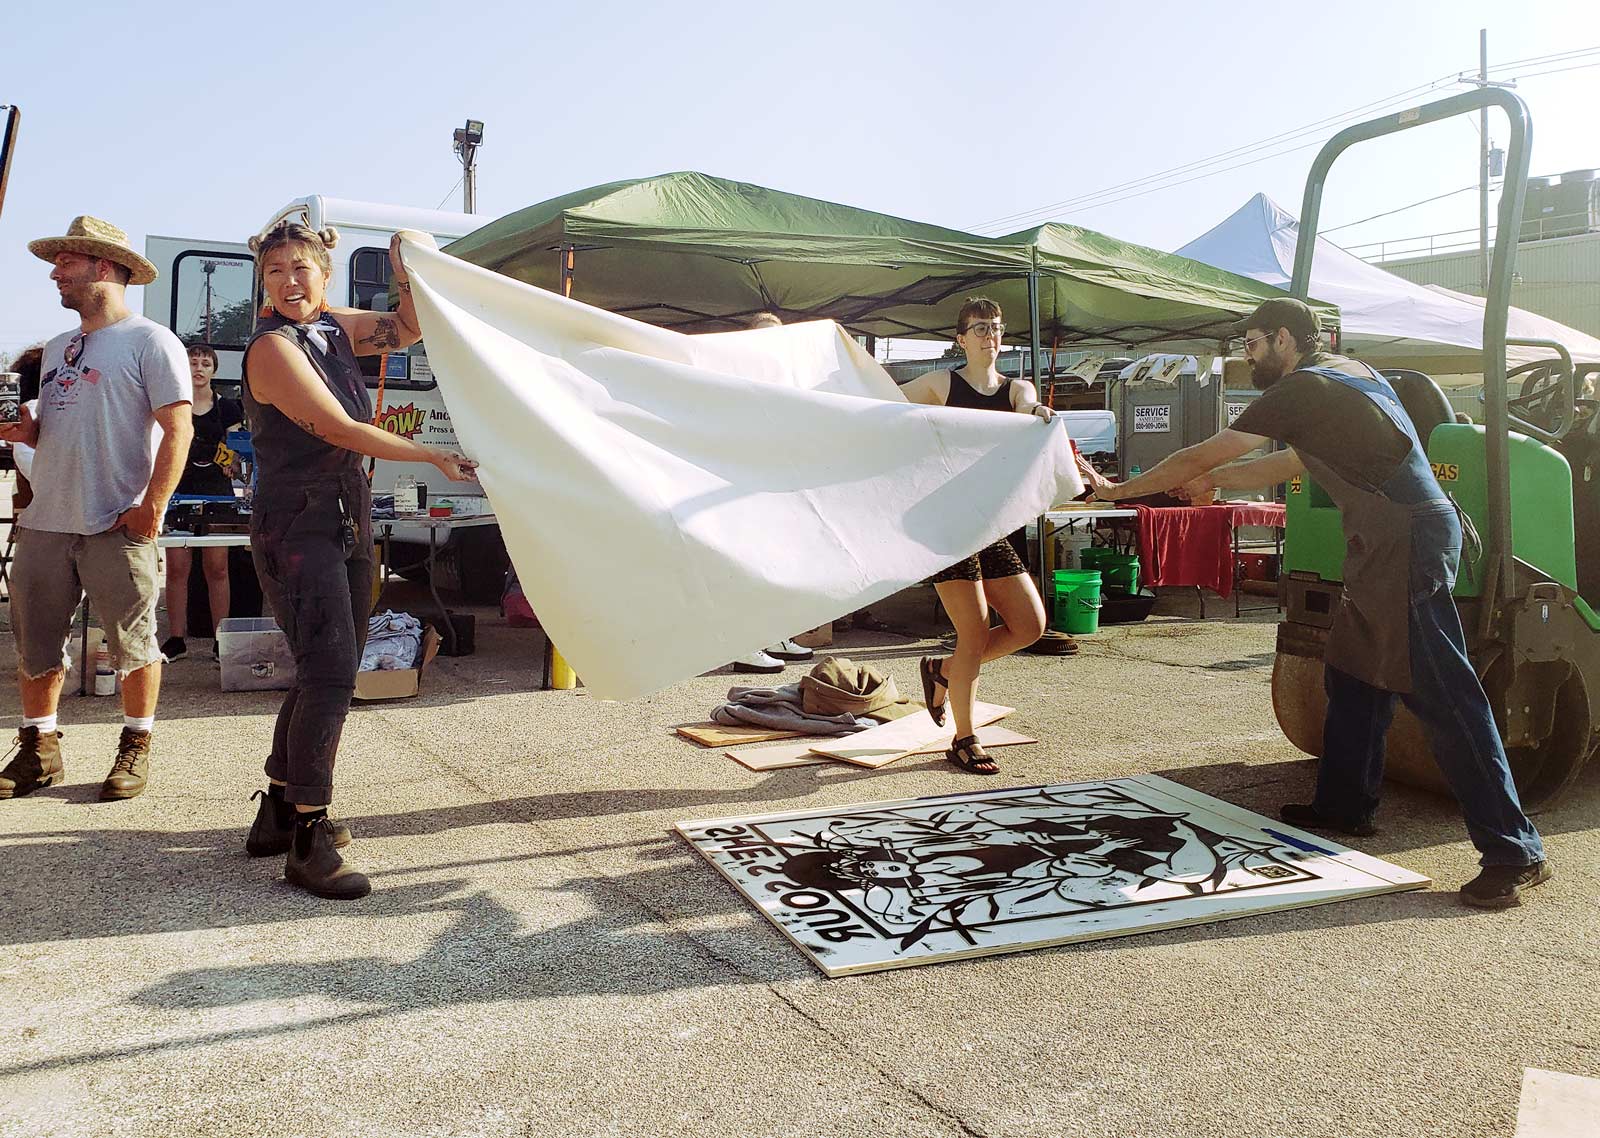 A group of artists preparing to drop cloth onto large woodcut on the ground.